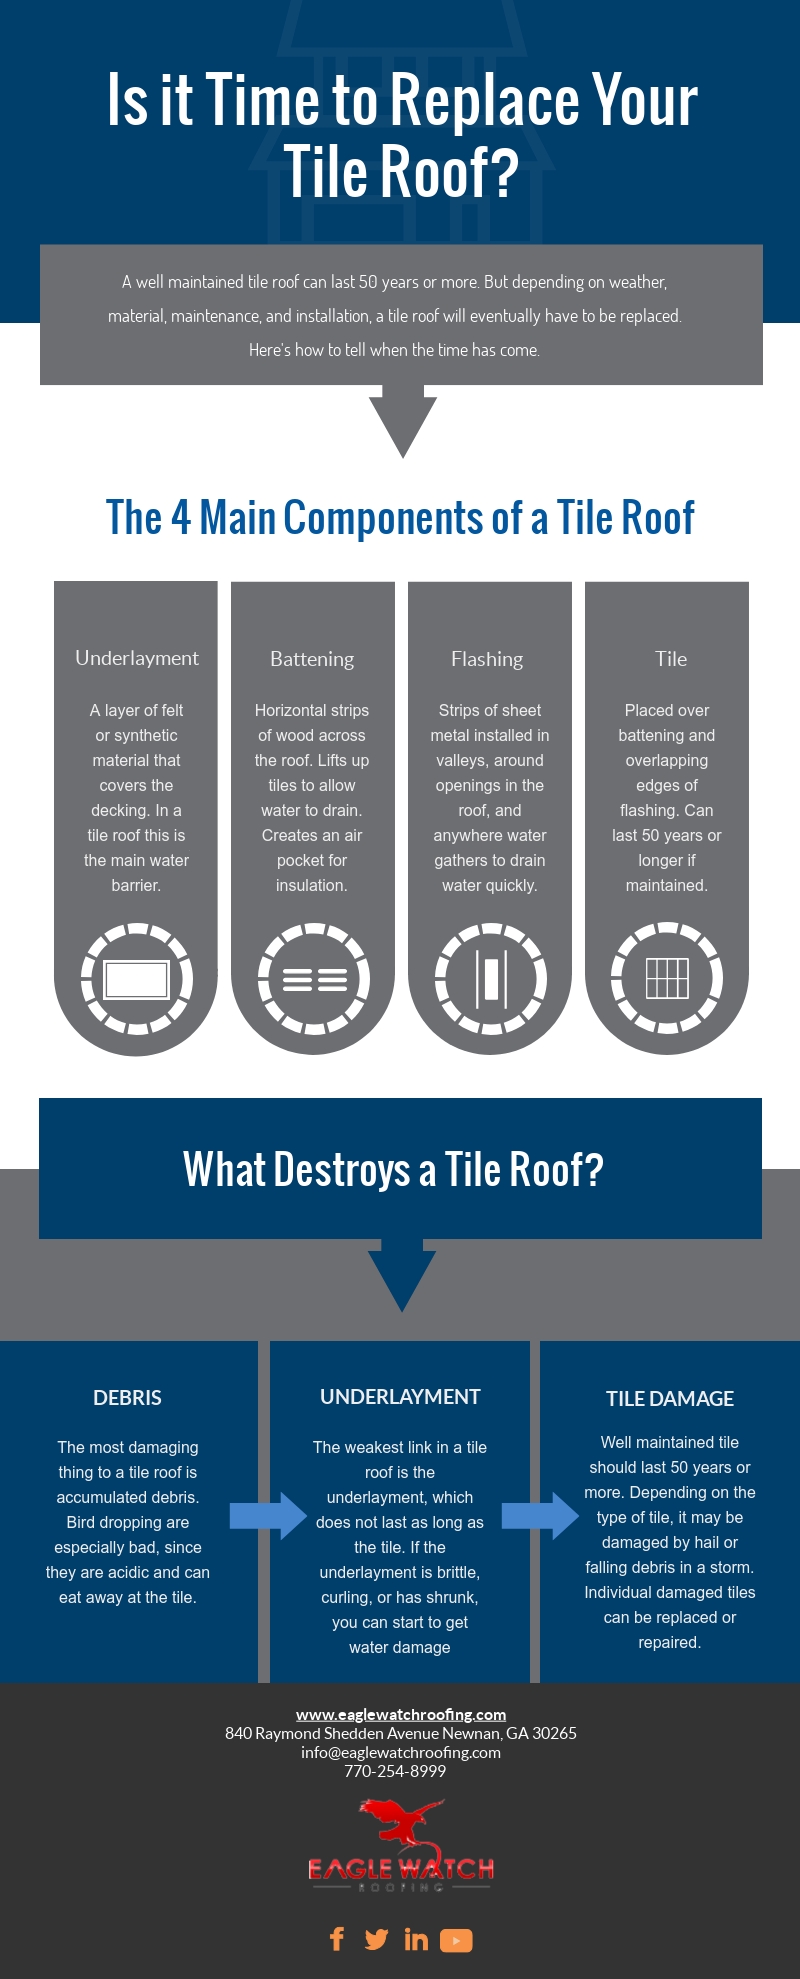 Is it Time to Replace Your Tile Roof [infographic]